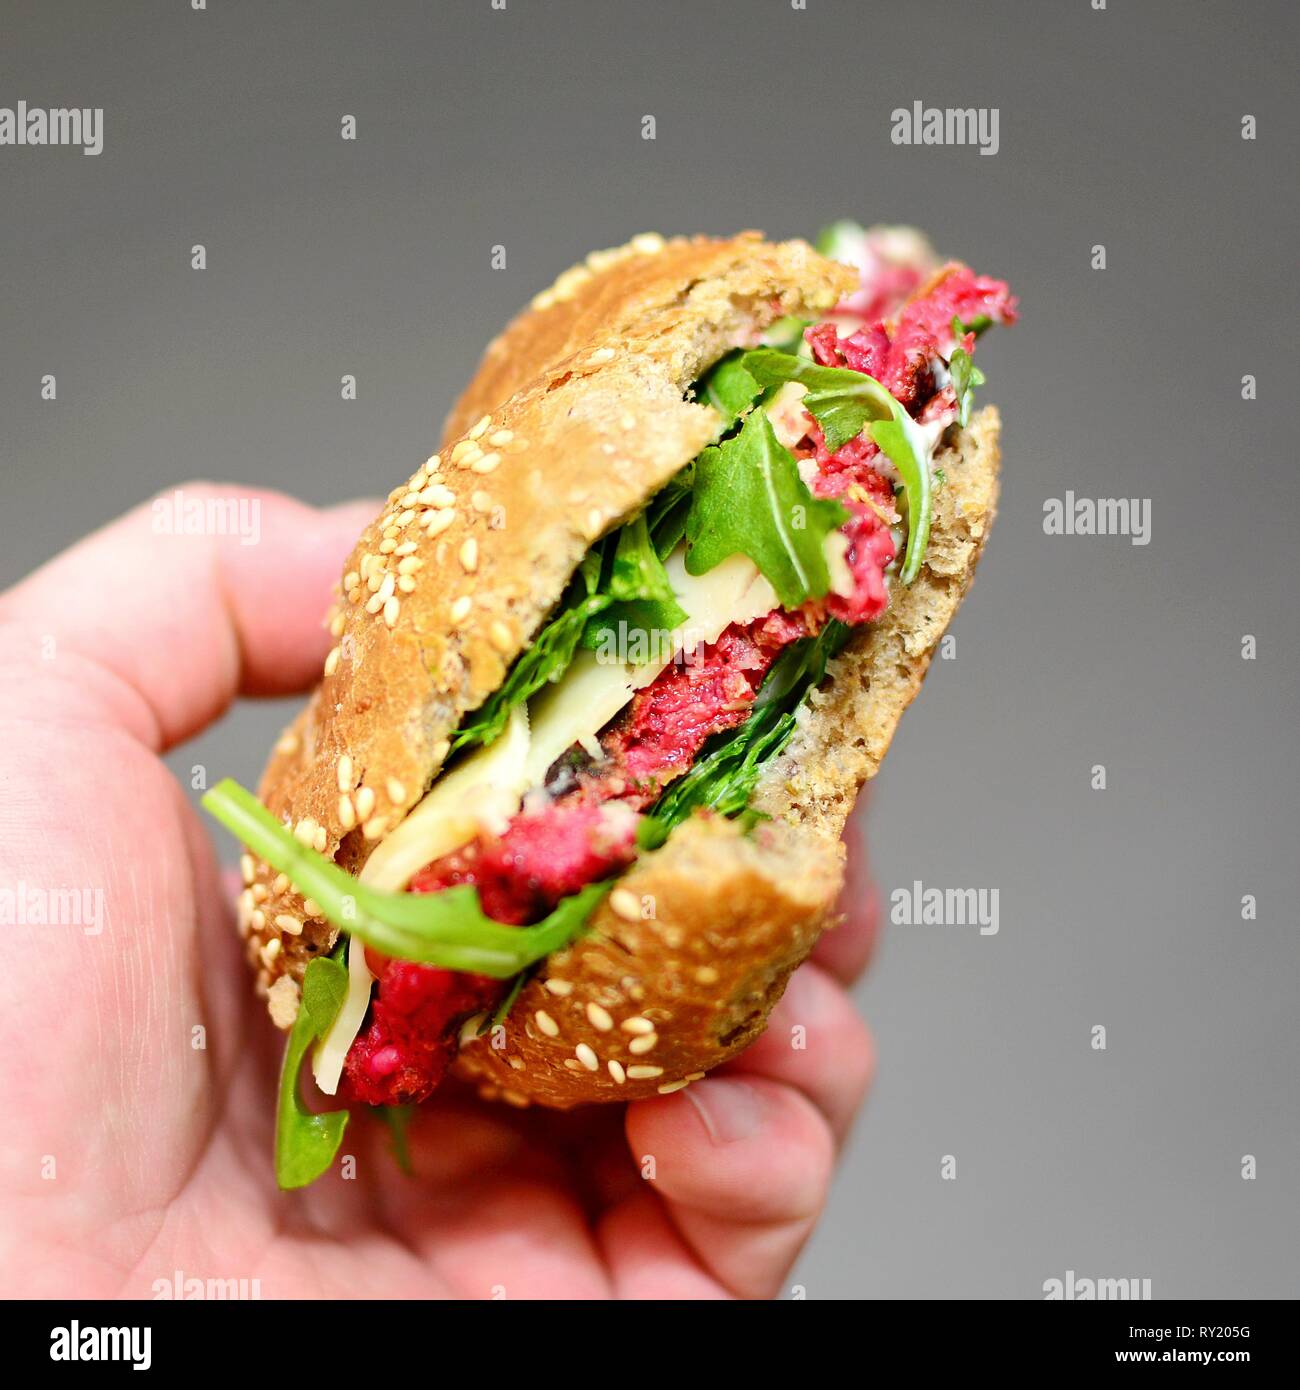 Mans Hand Holding a Beetroot and Arugula Burger with Missing Bites. Stock Photo